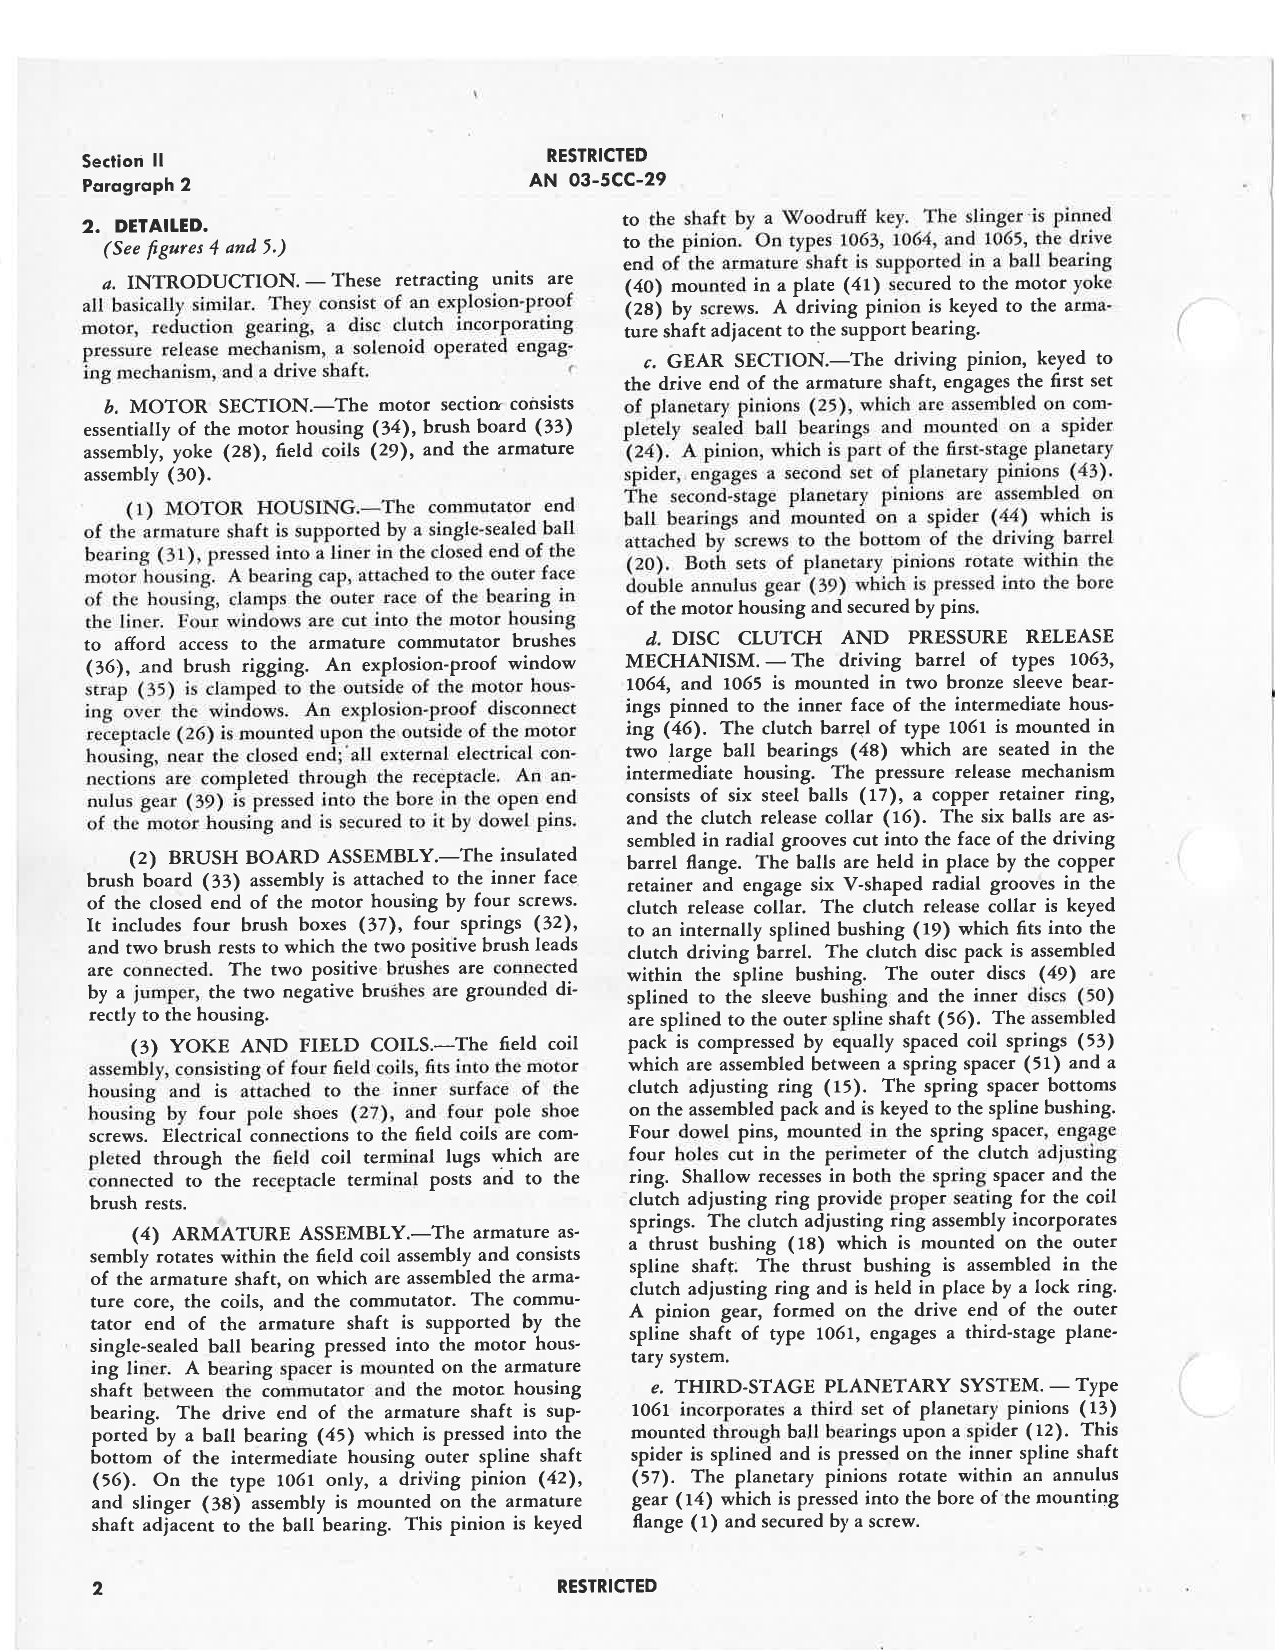 Sample page 8 from AirCorps Library document: Operation, Service & Overhaul Instructions with Parts Catalog for Retracting Motors